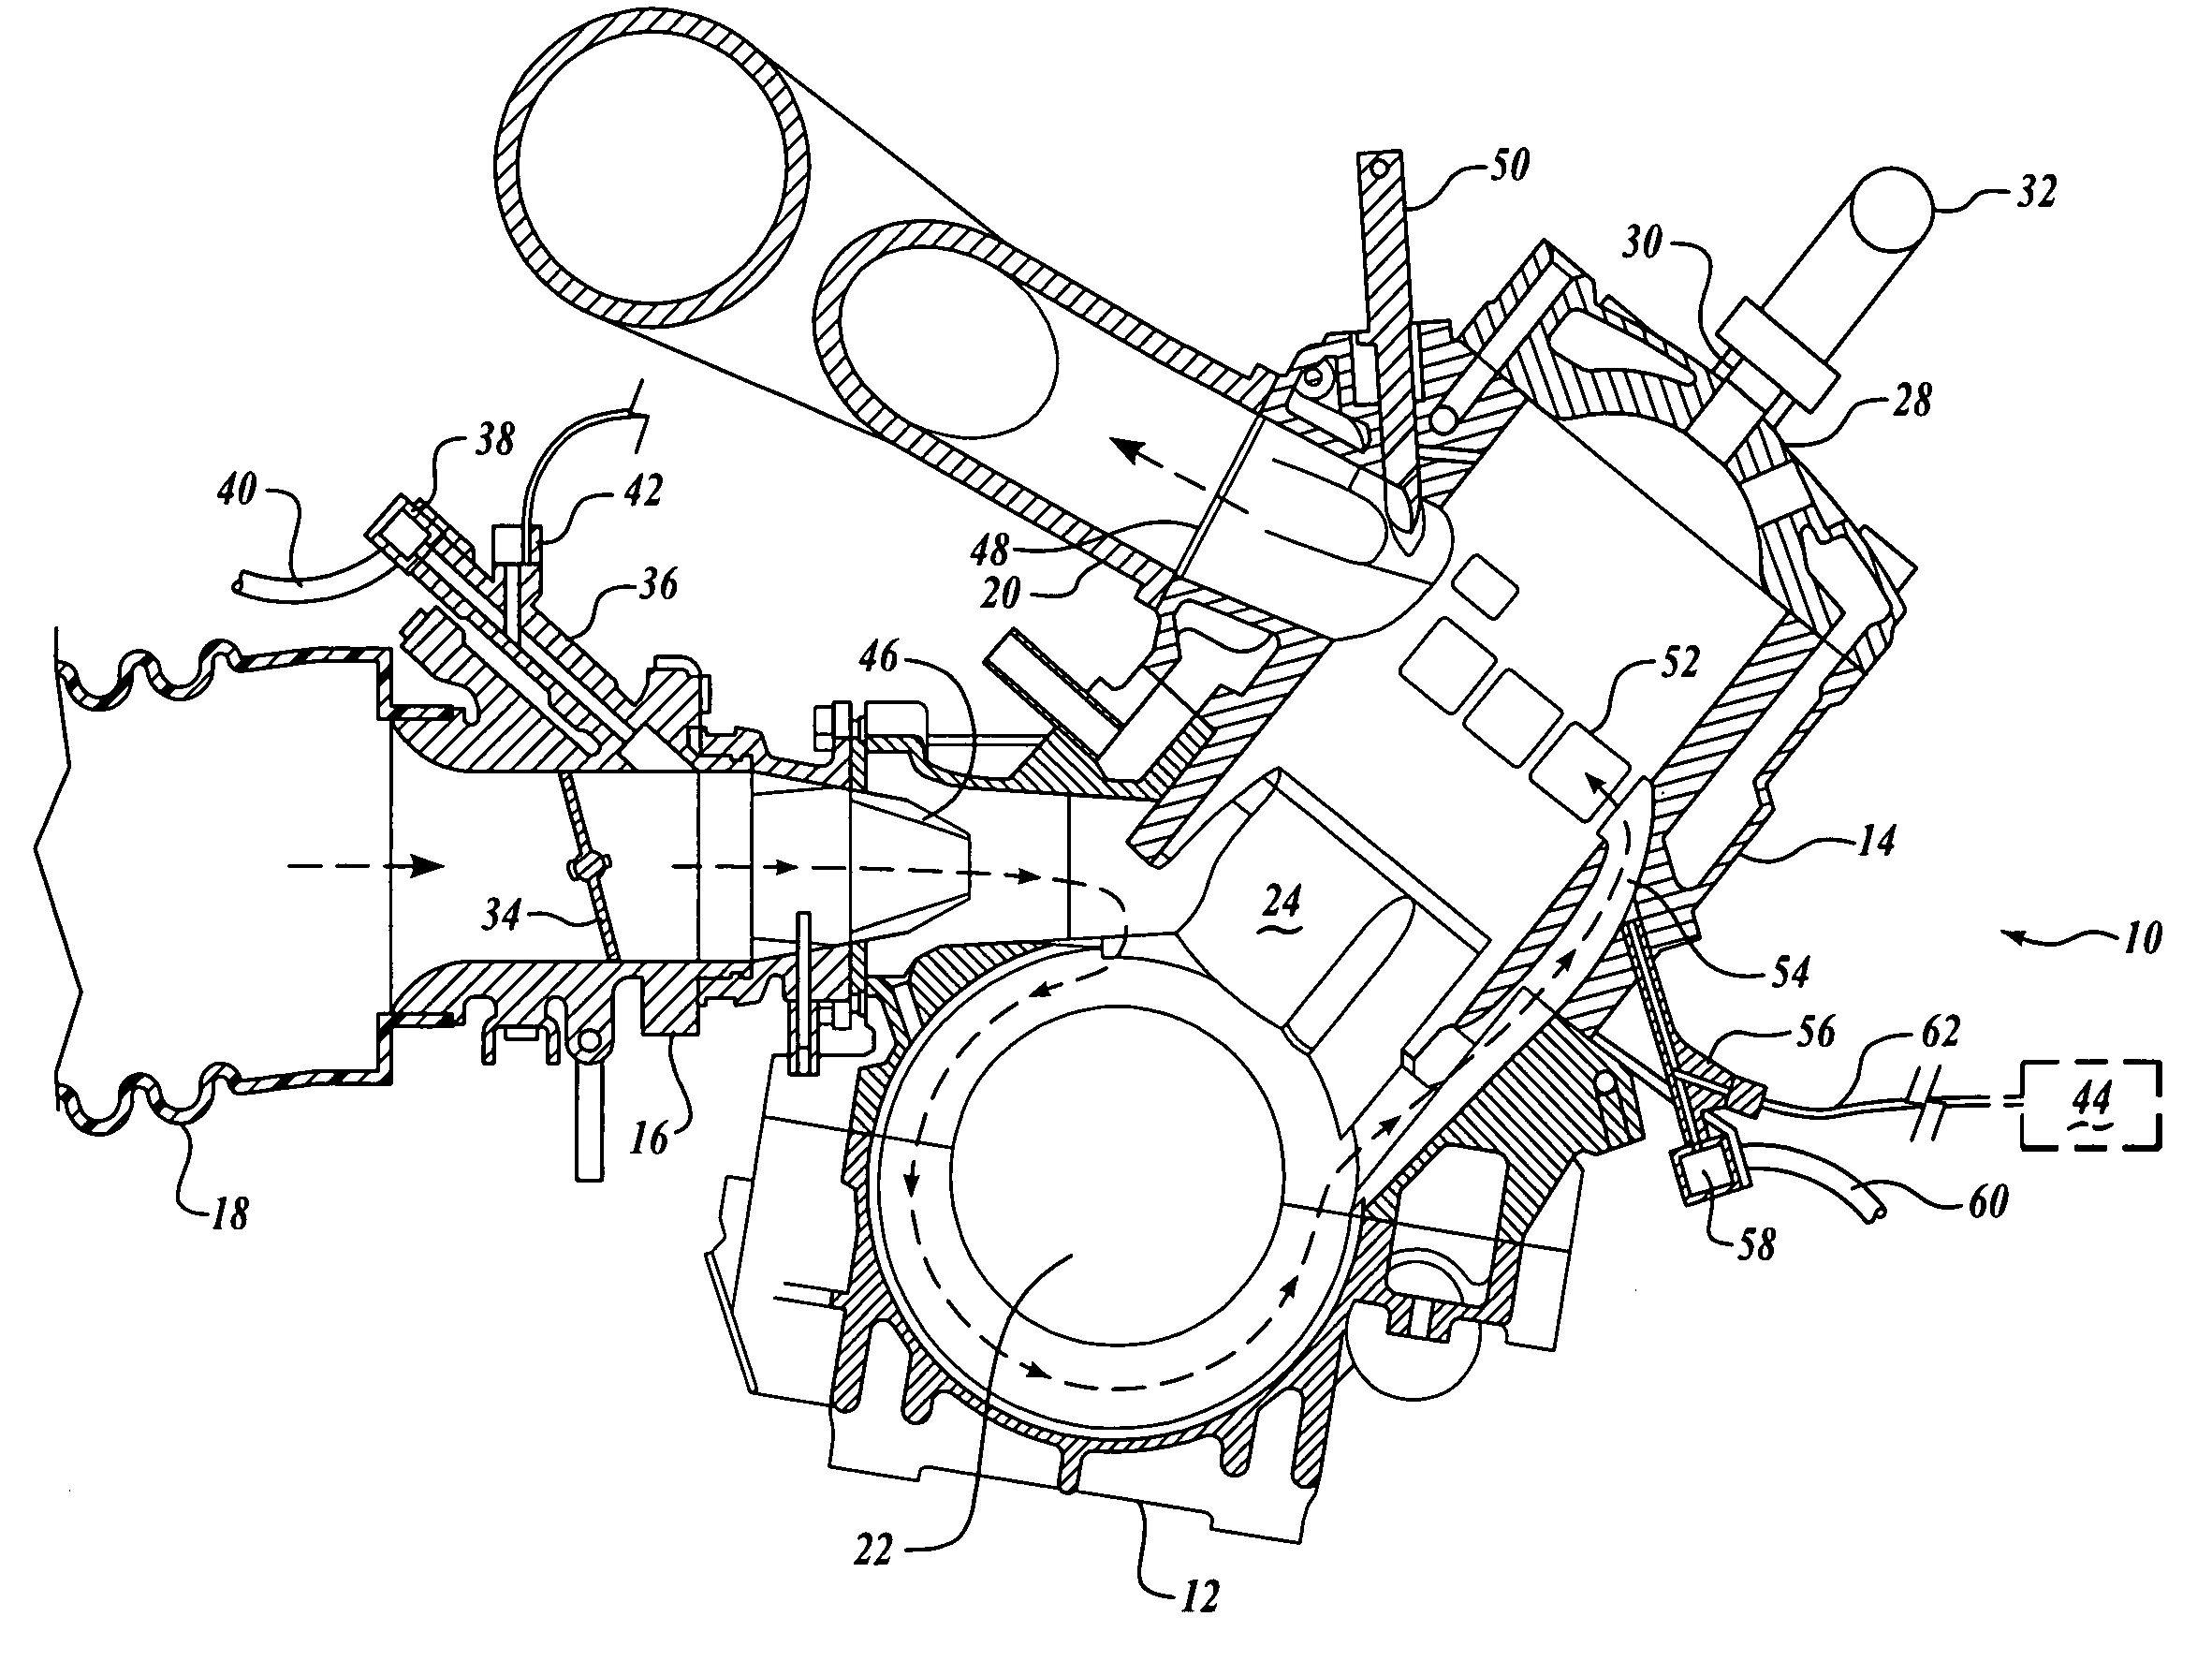 Multi-location fuel injection system